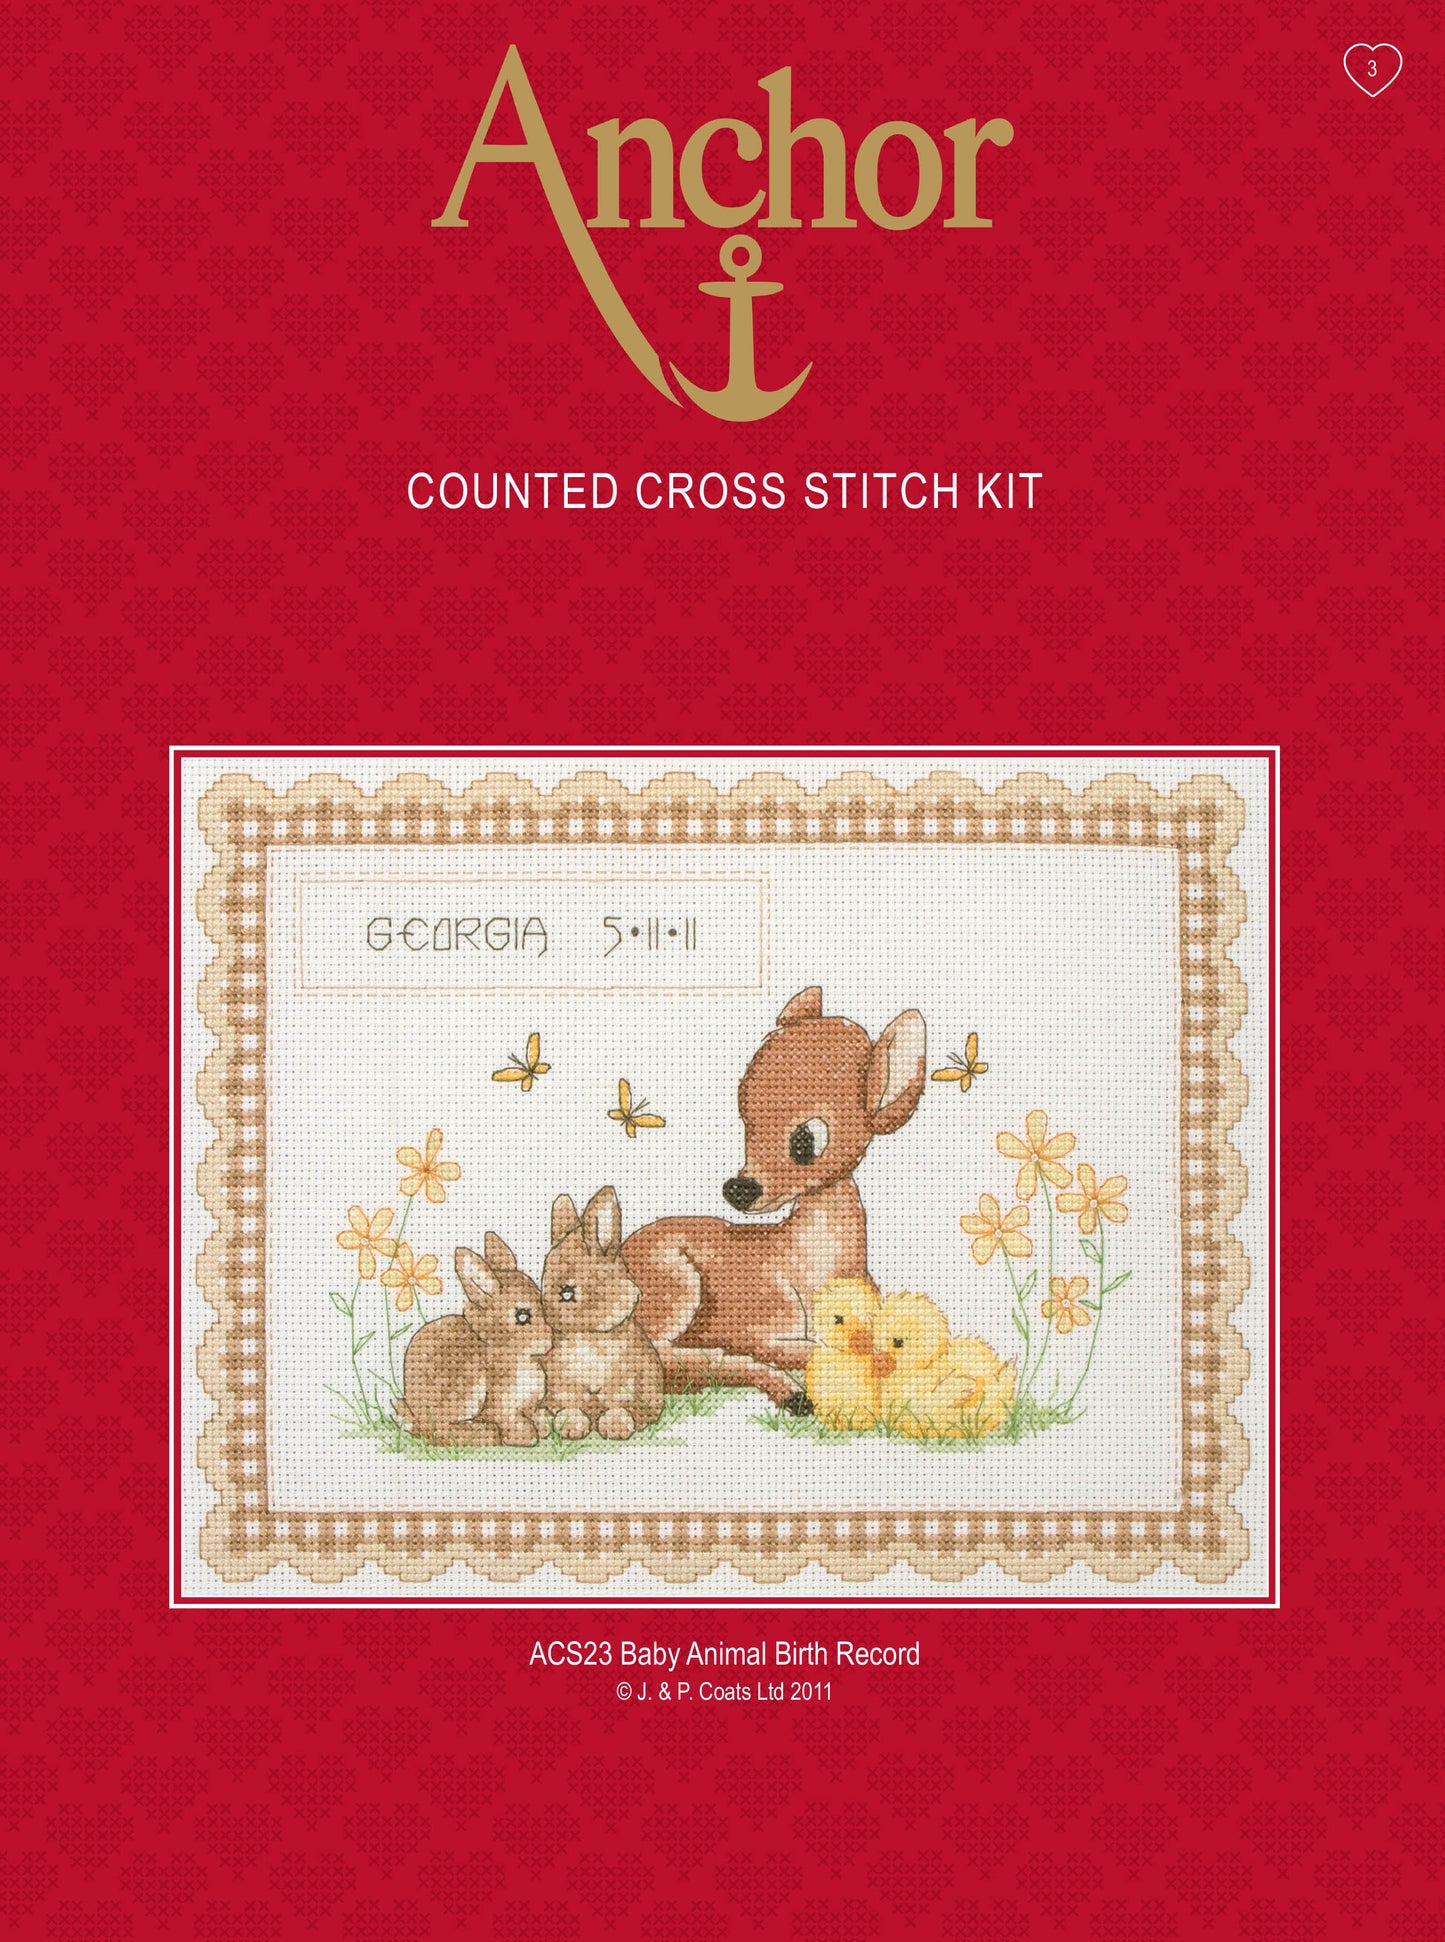 Anchor Counted Cross Stitch Kit Birth Record Baby Animal